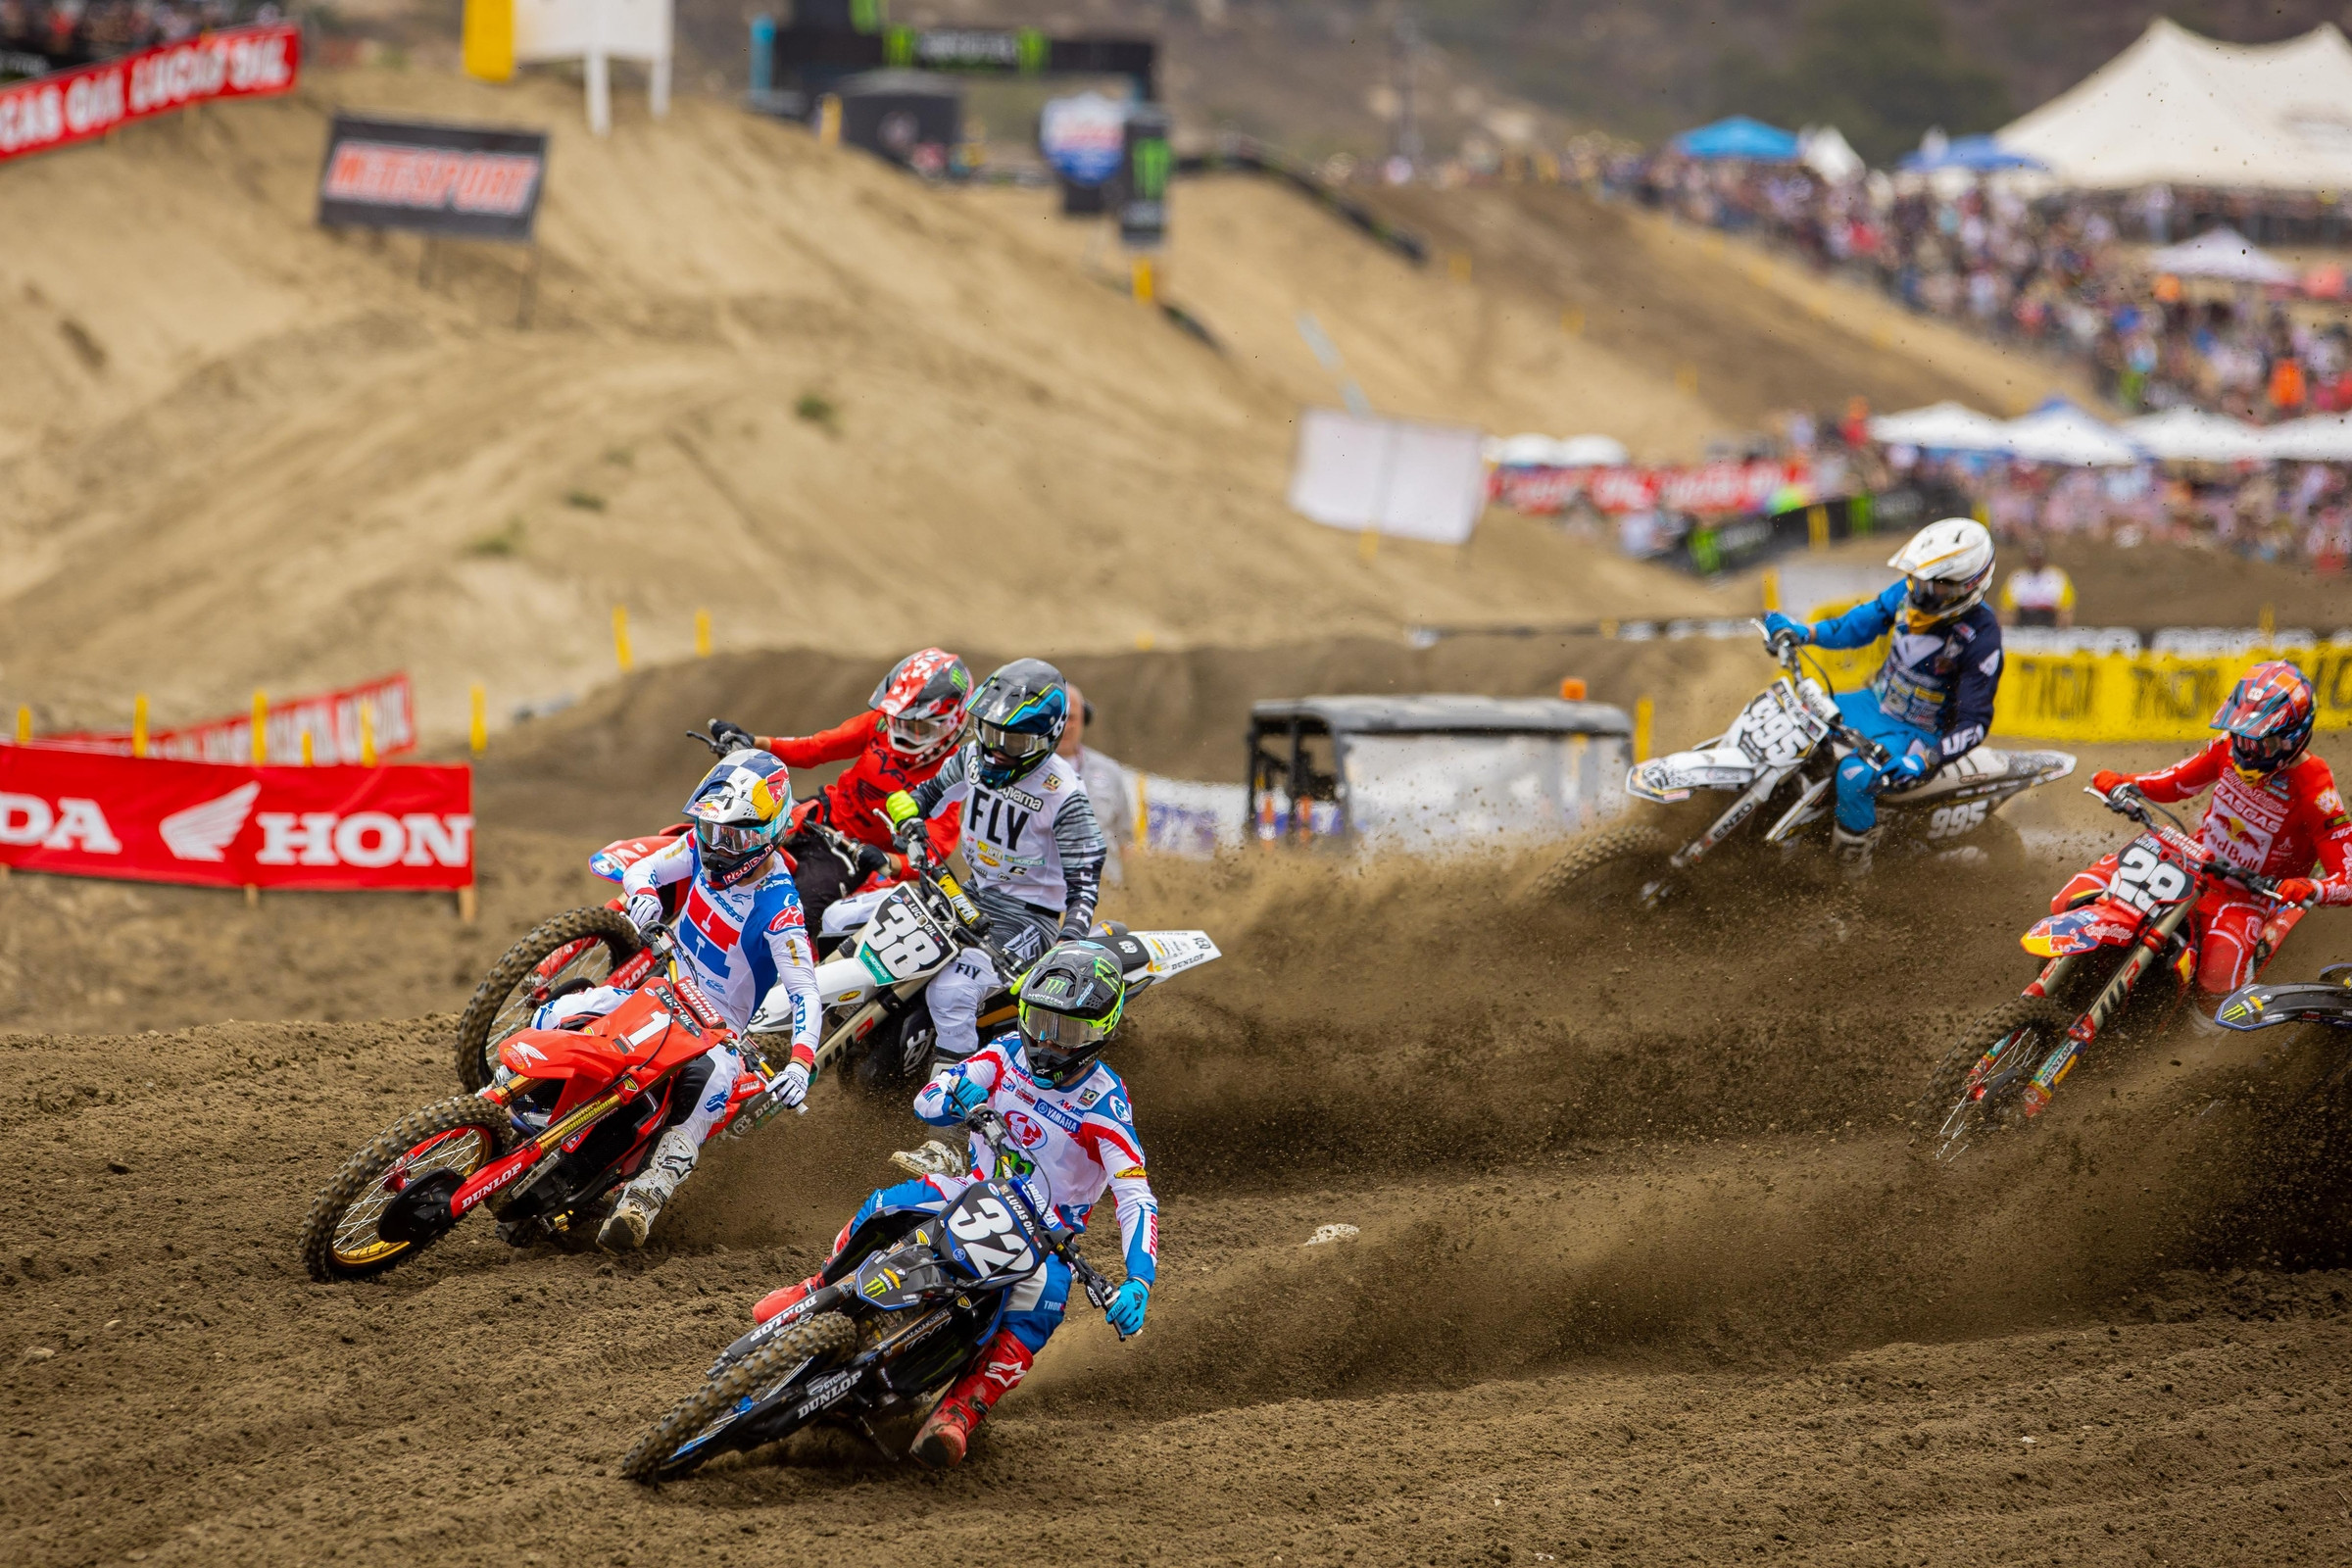 Watch: Hangtown Qualifying Will Be Streamed Free on YouTube 